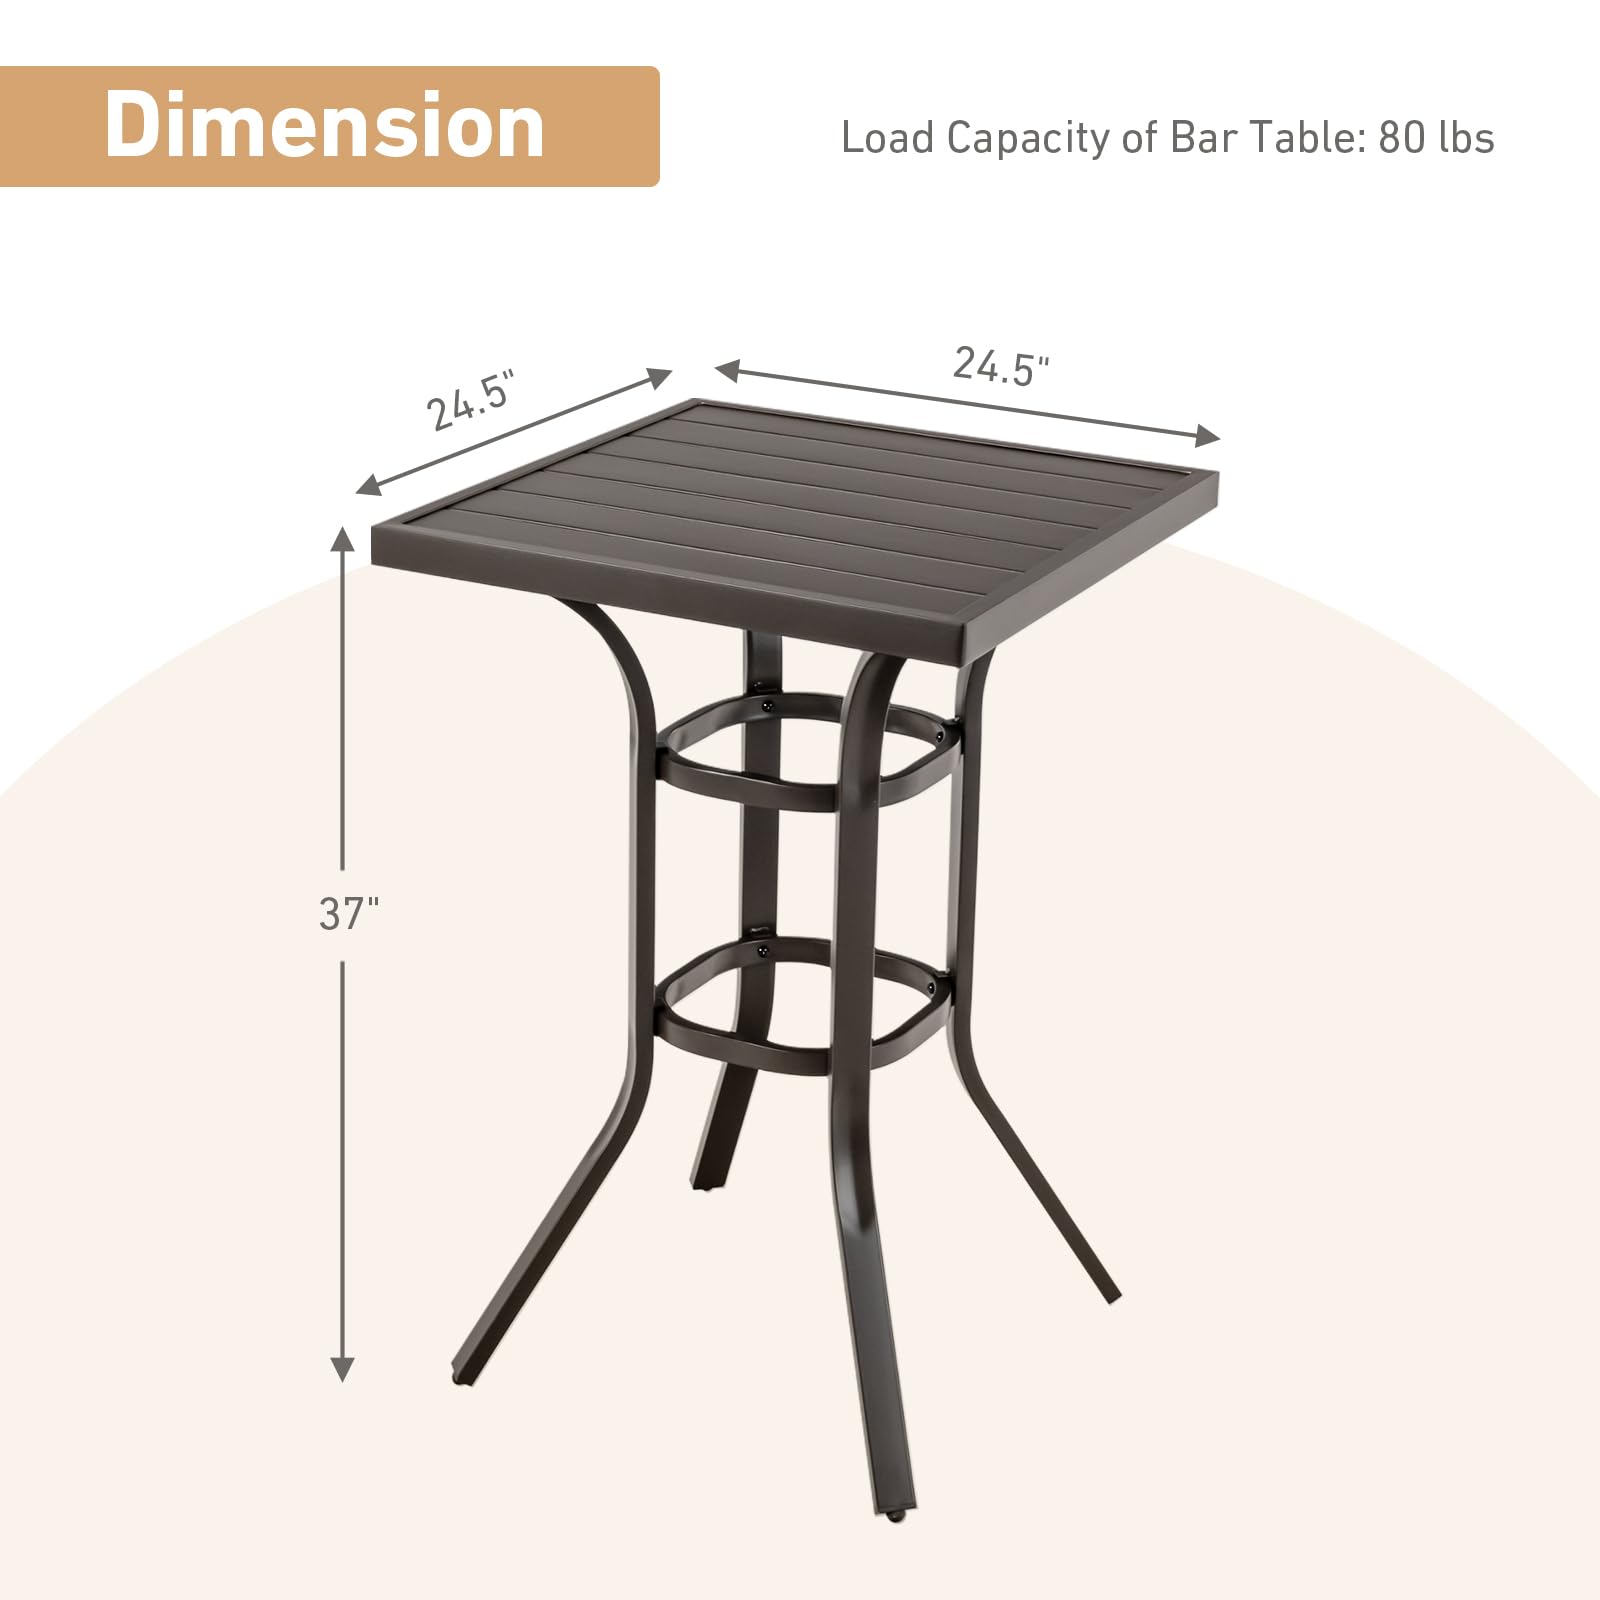 Giantex Patio Bar Table, 37" Outdoor Bar Height Patio Table with Metal Frame & Slatted Tabletop